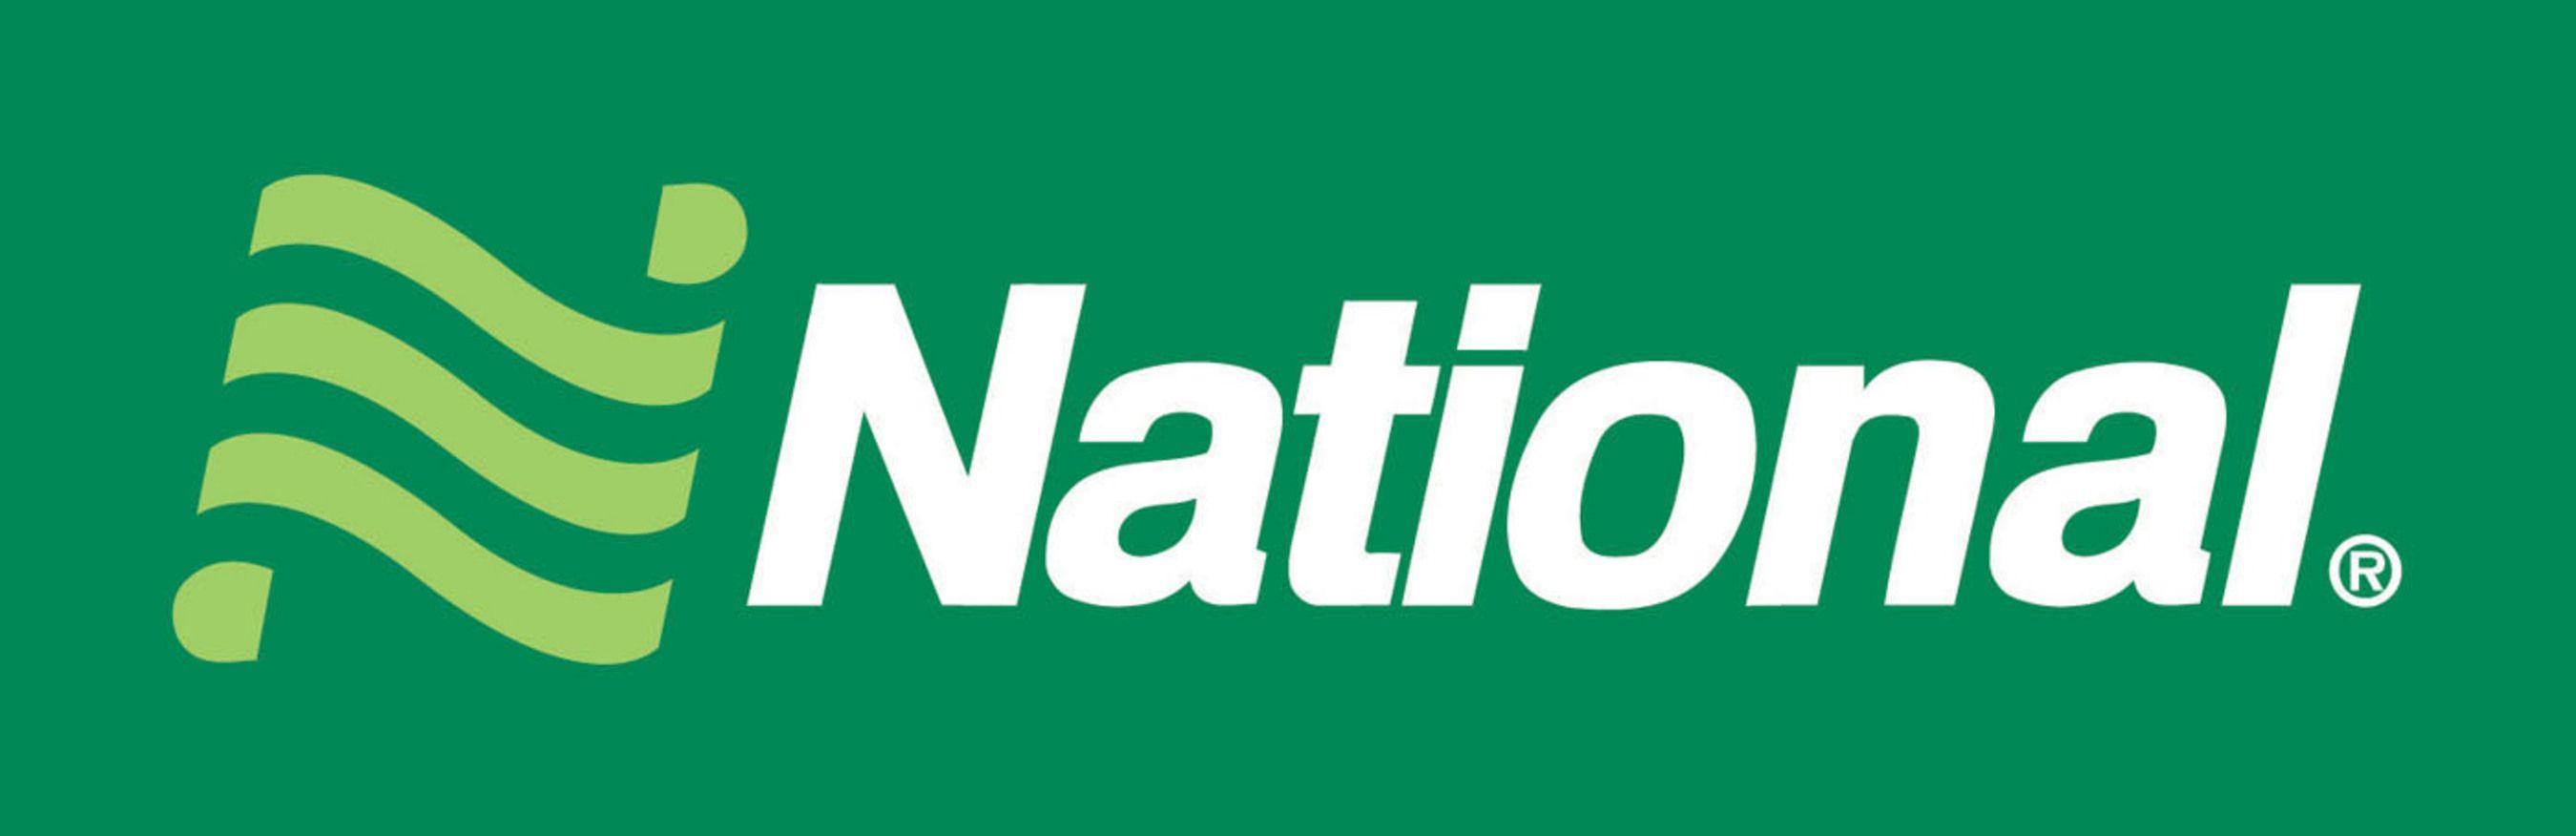 National Car Rental Logo - National Car Rental Offers Emerald Club Members Special Access to ...